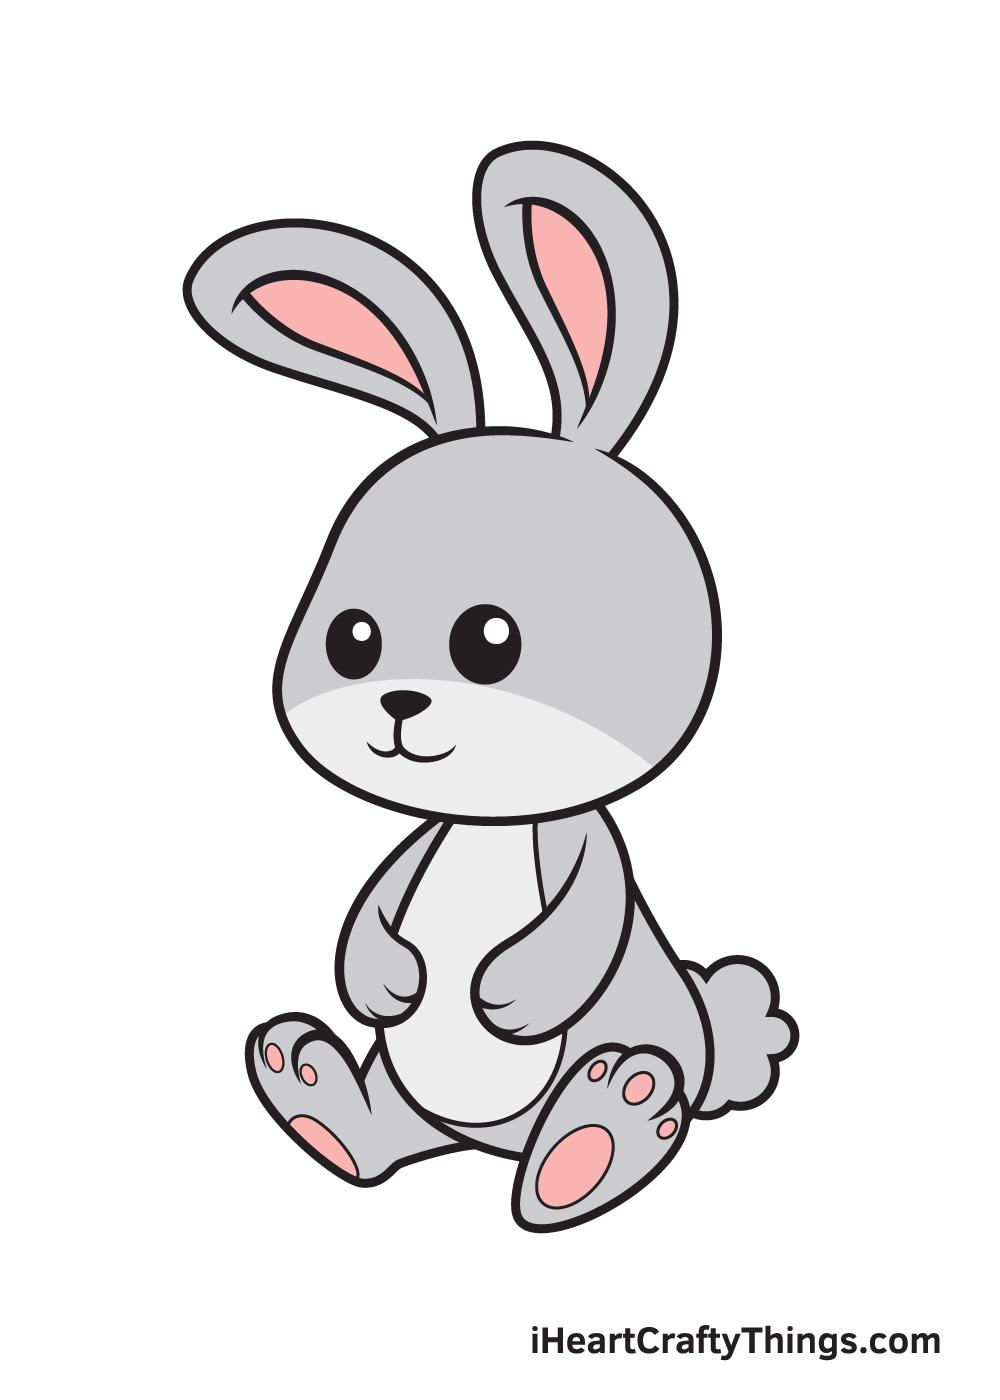 Bunny Drawing – 9 Steps